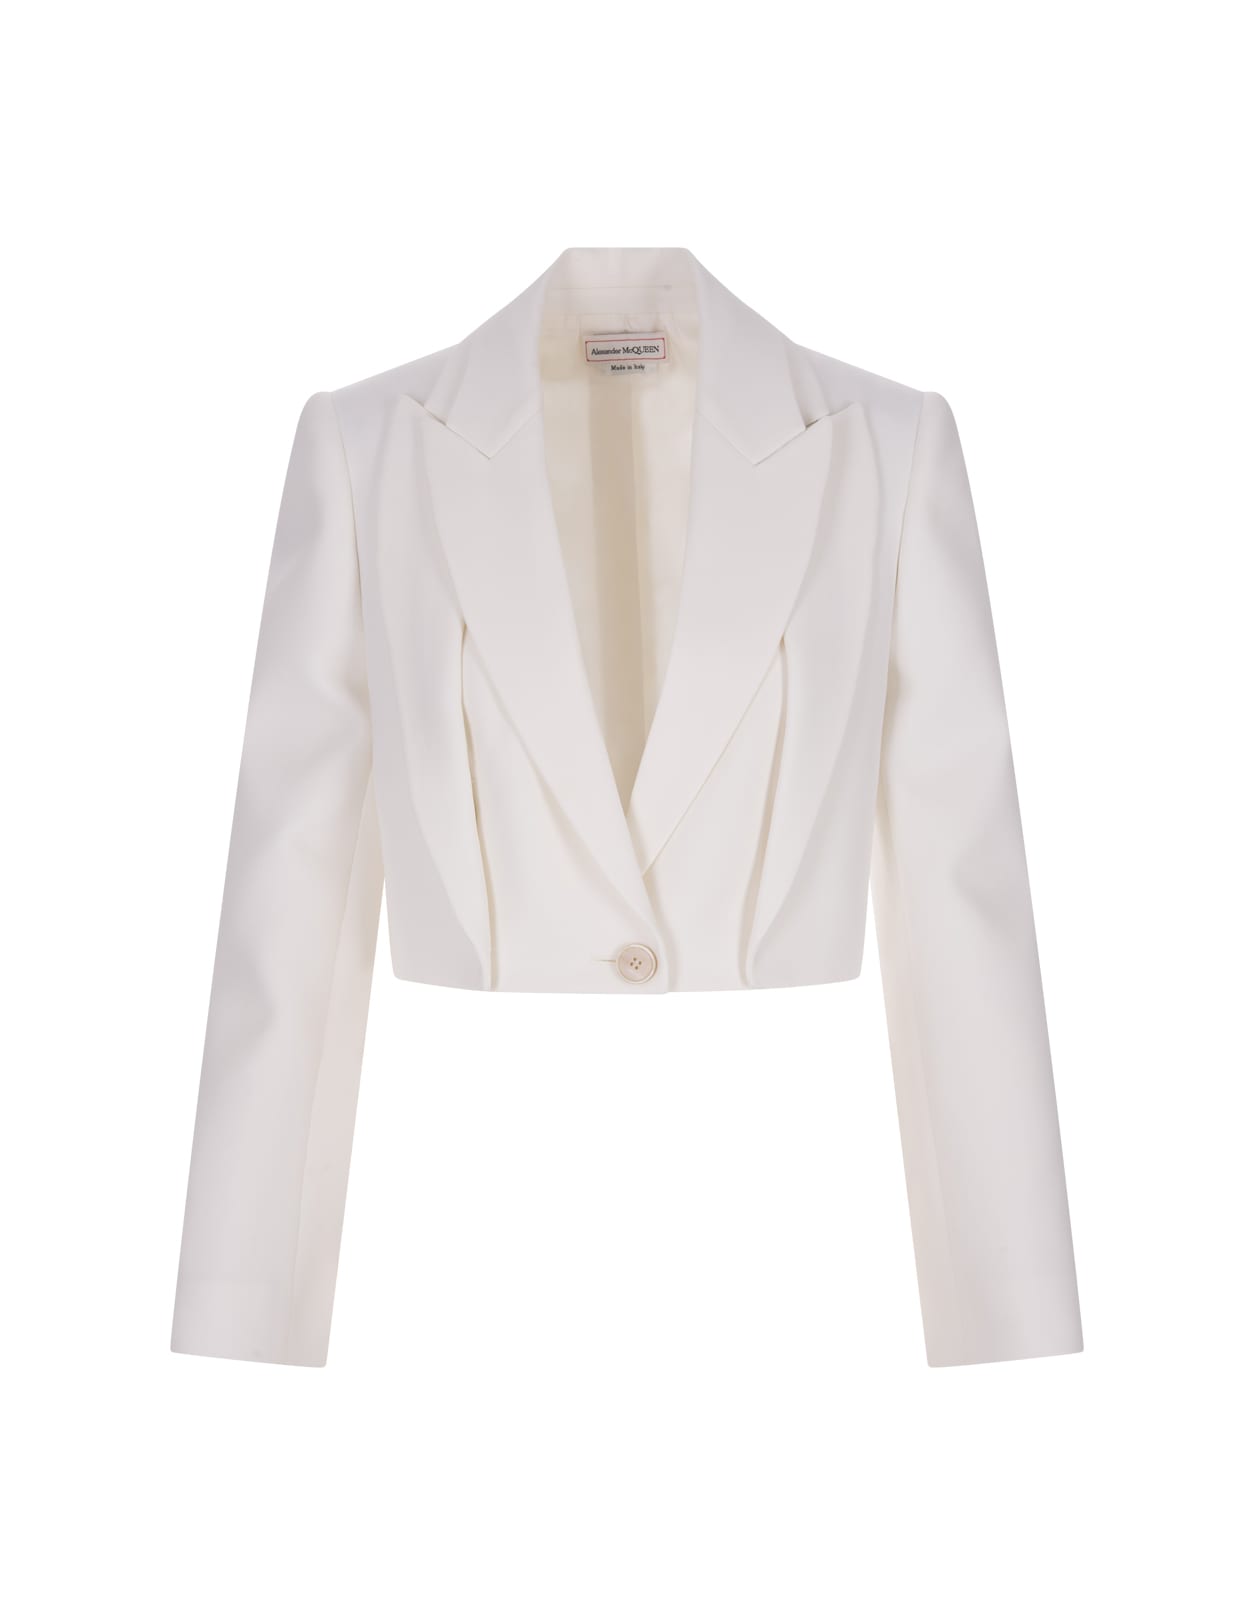 ALEXANDER MCQUEEN WHITE CROPPED JACKET WITH DOUBLE REVERS AND CUT-OUT